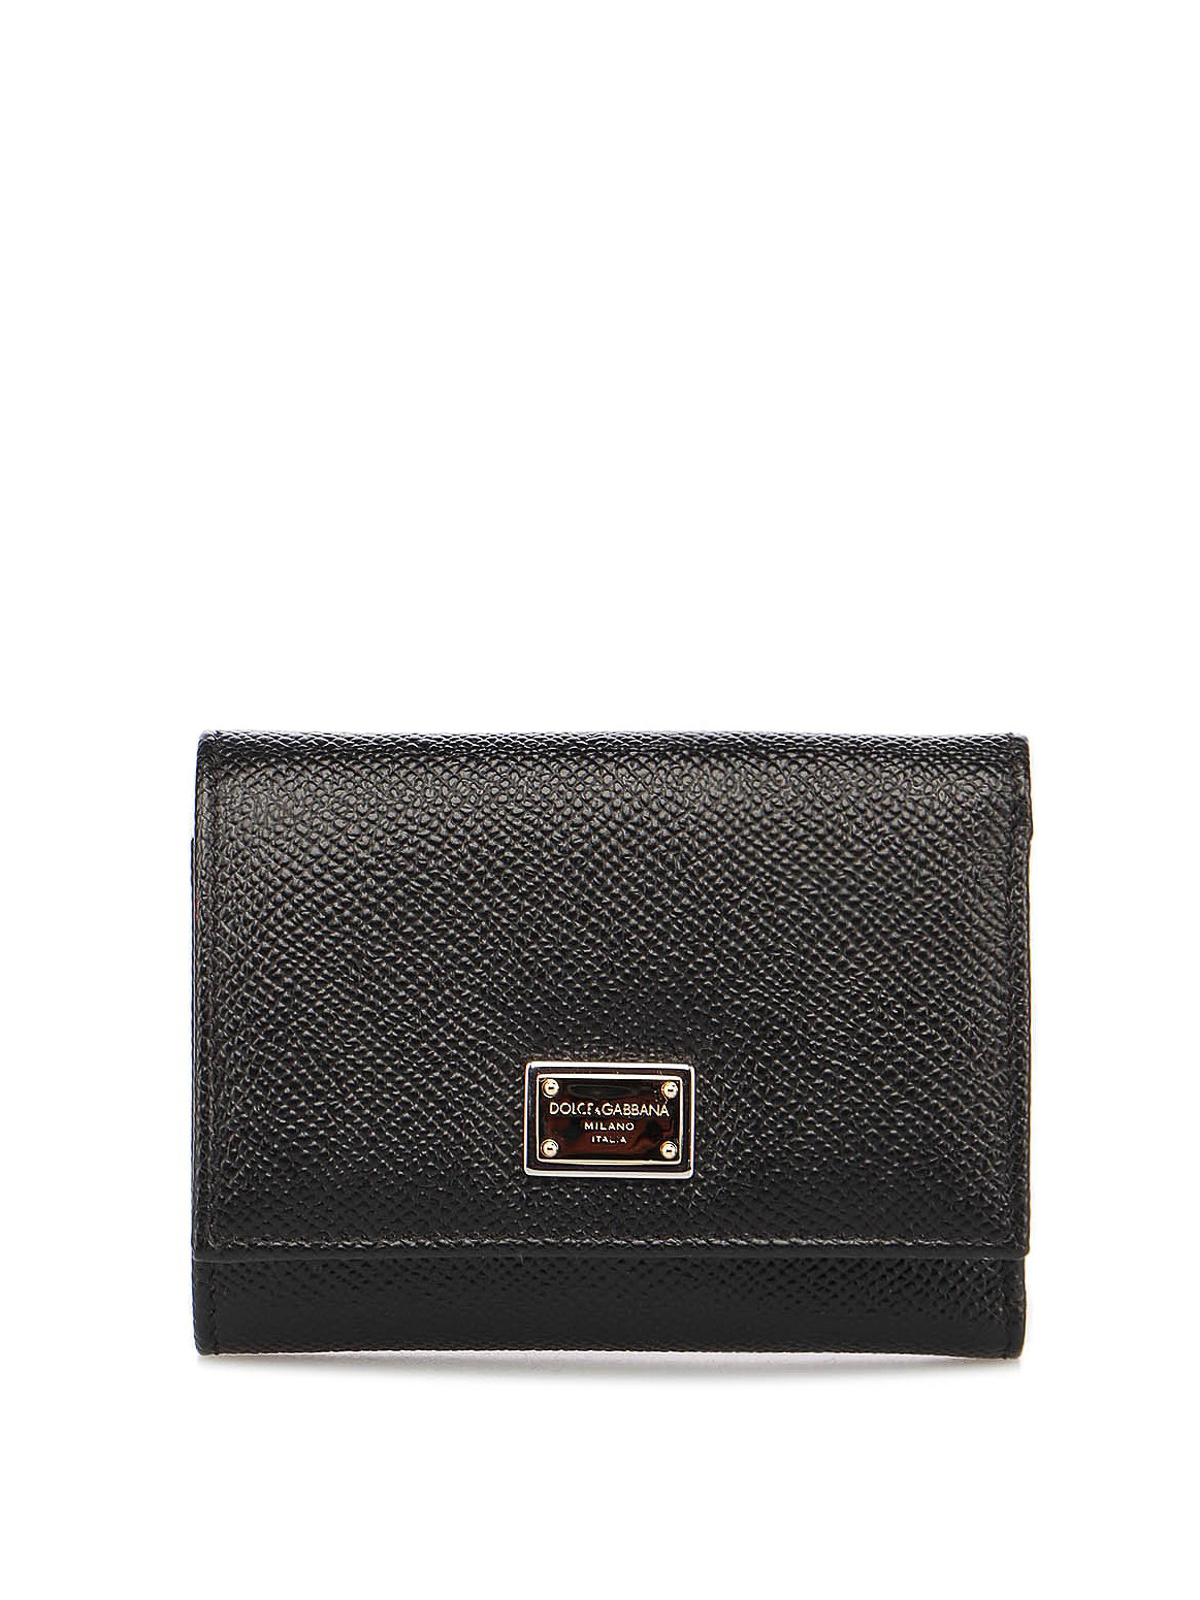 Dolce & Gabbana Hammered Leather Trifold Wallet In Black | ModeSens